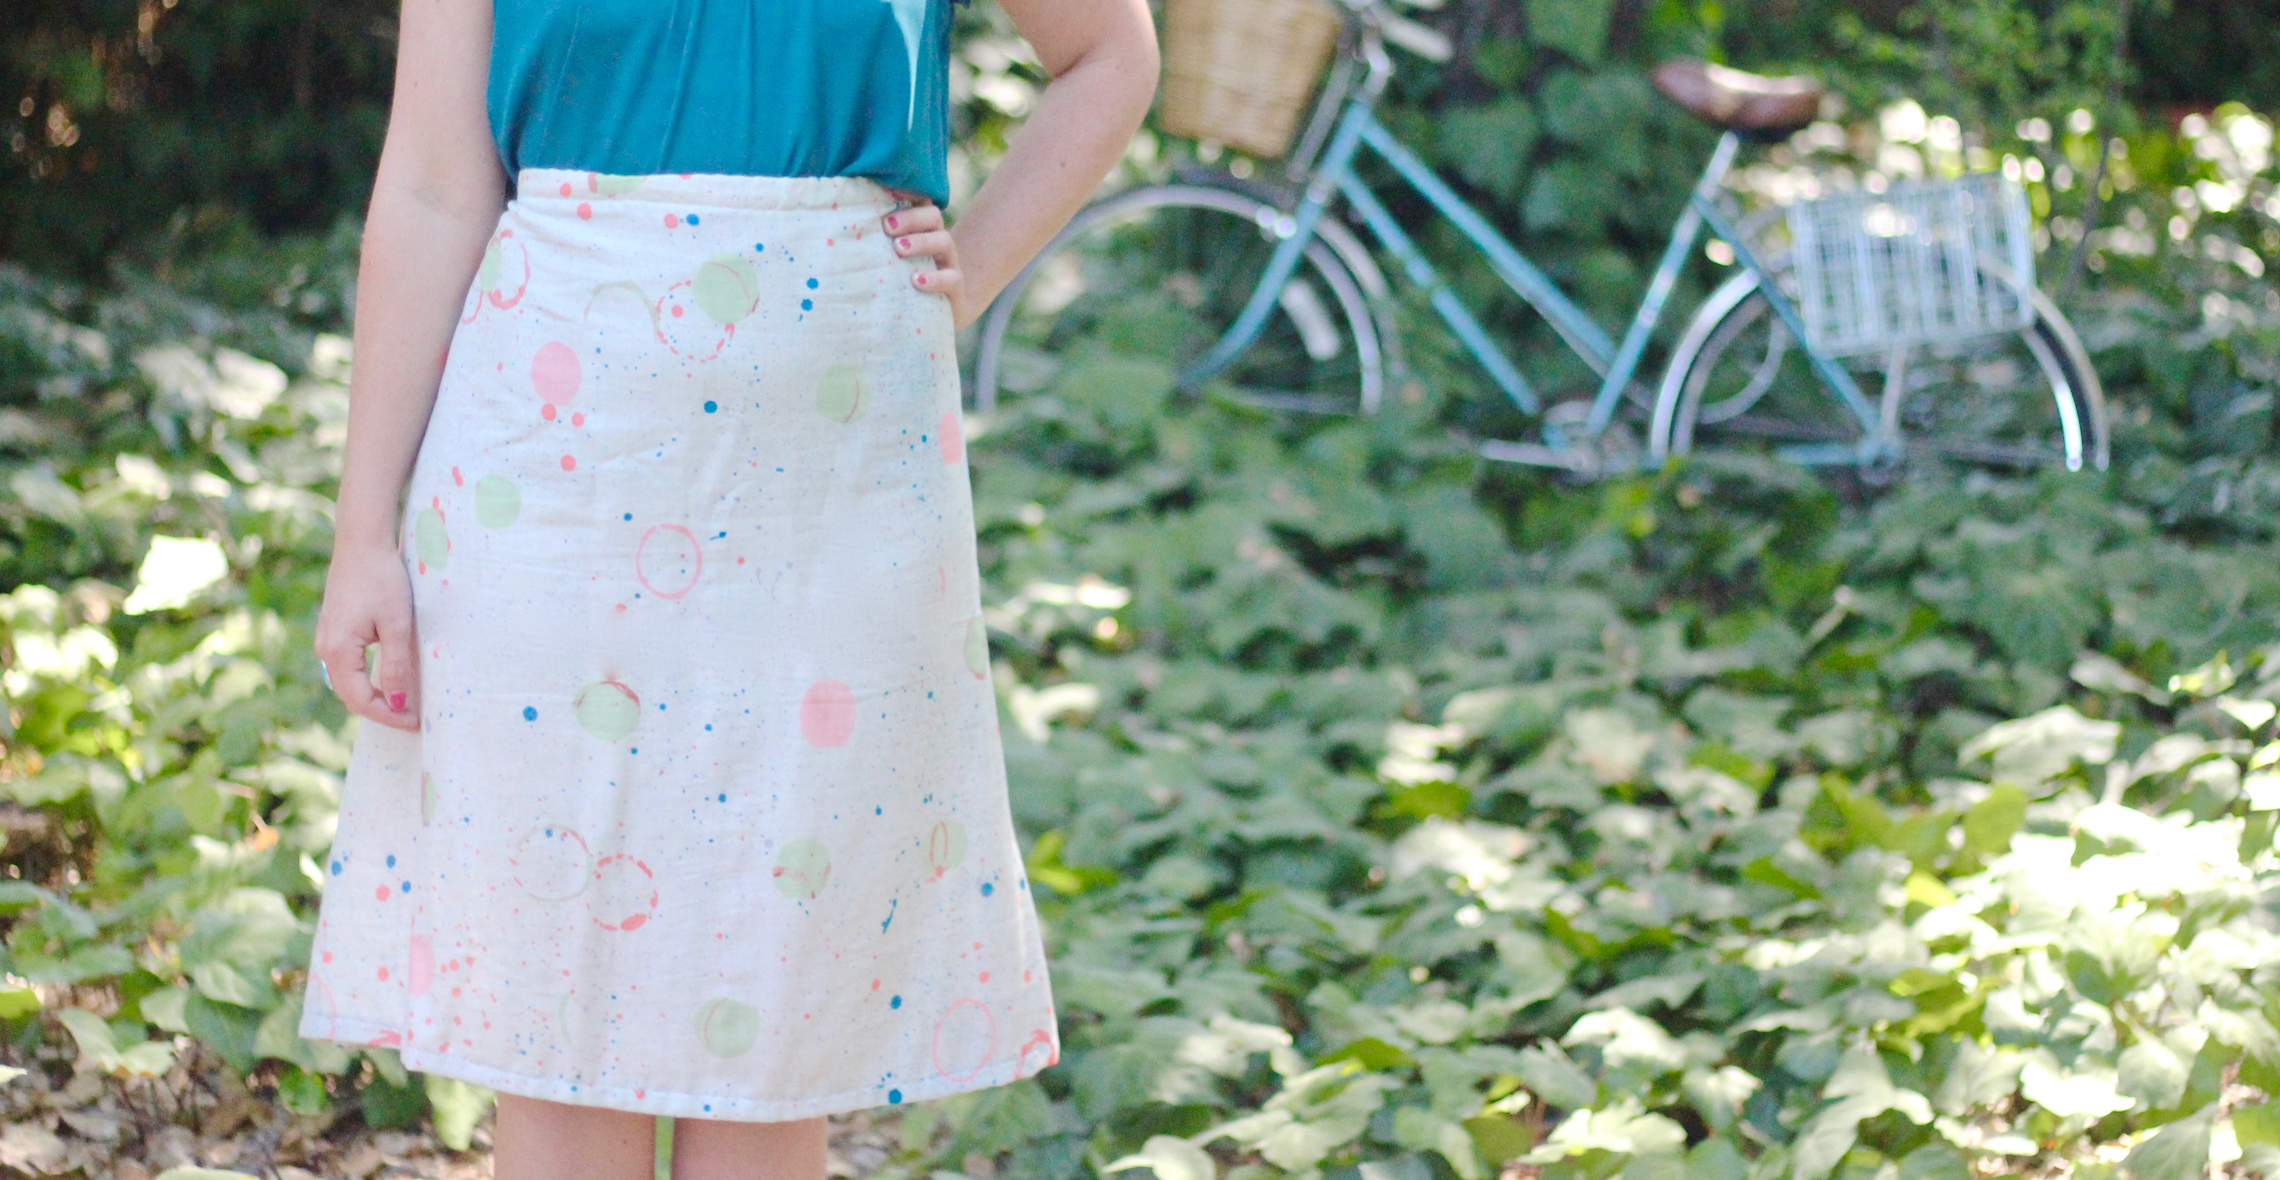 A-line skirt tutorial We All Sew